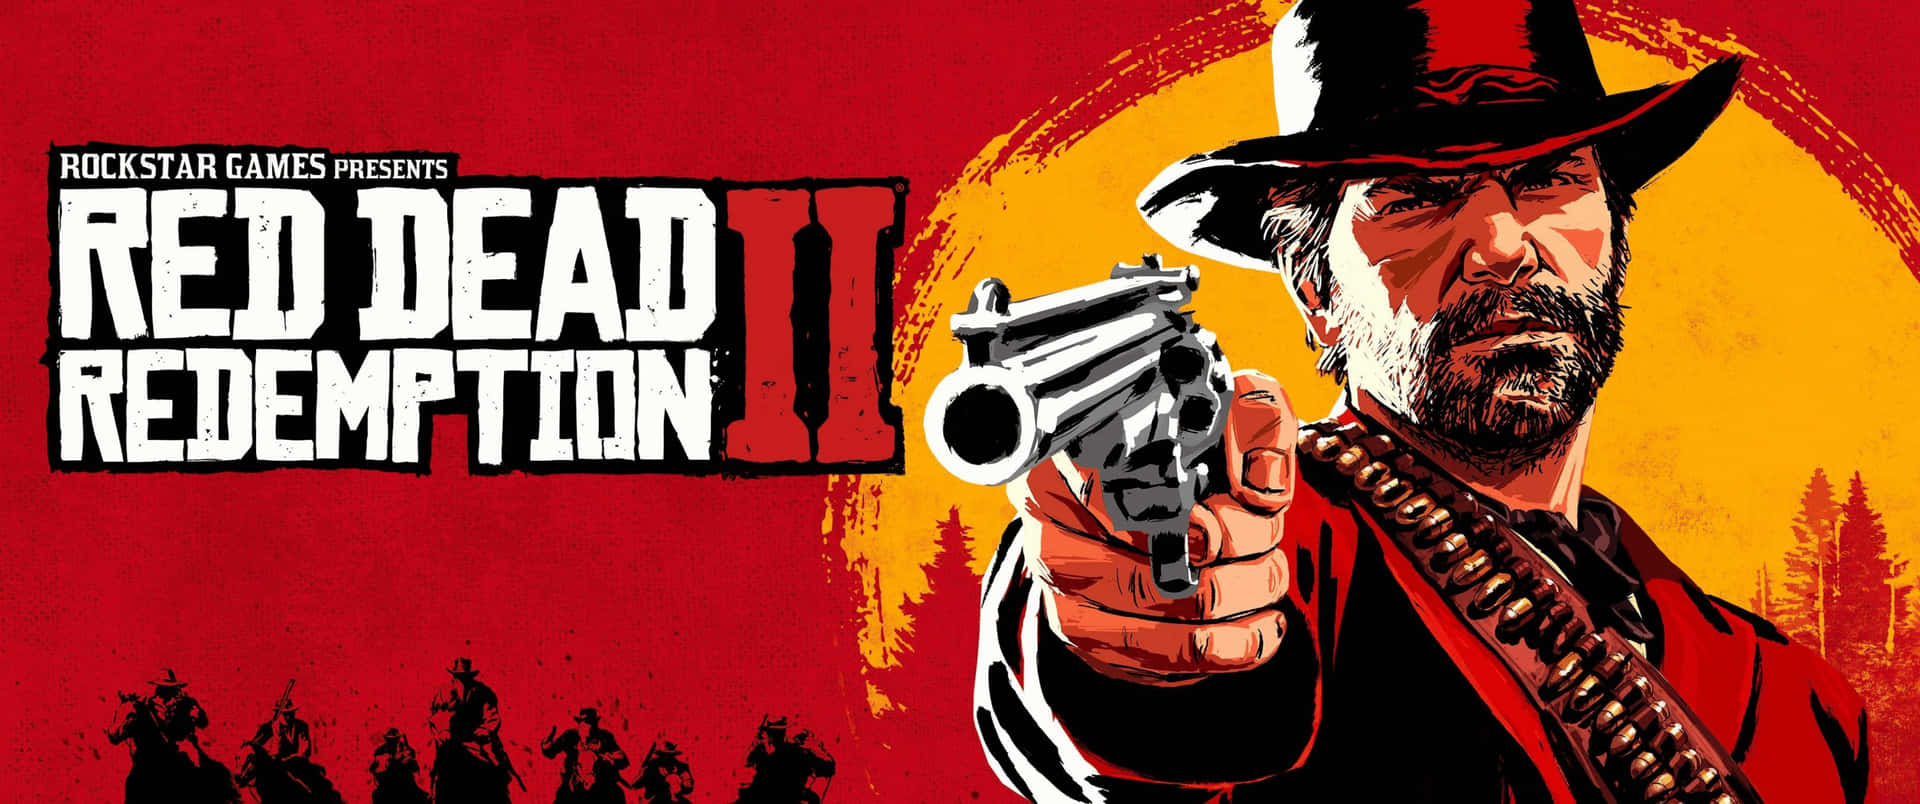 3440x1440p Red Dead Redemption 2 Background Poster